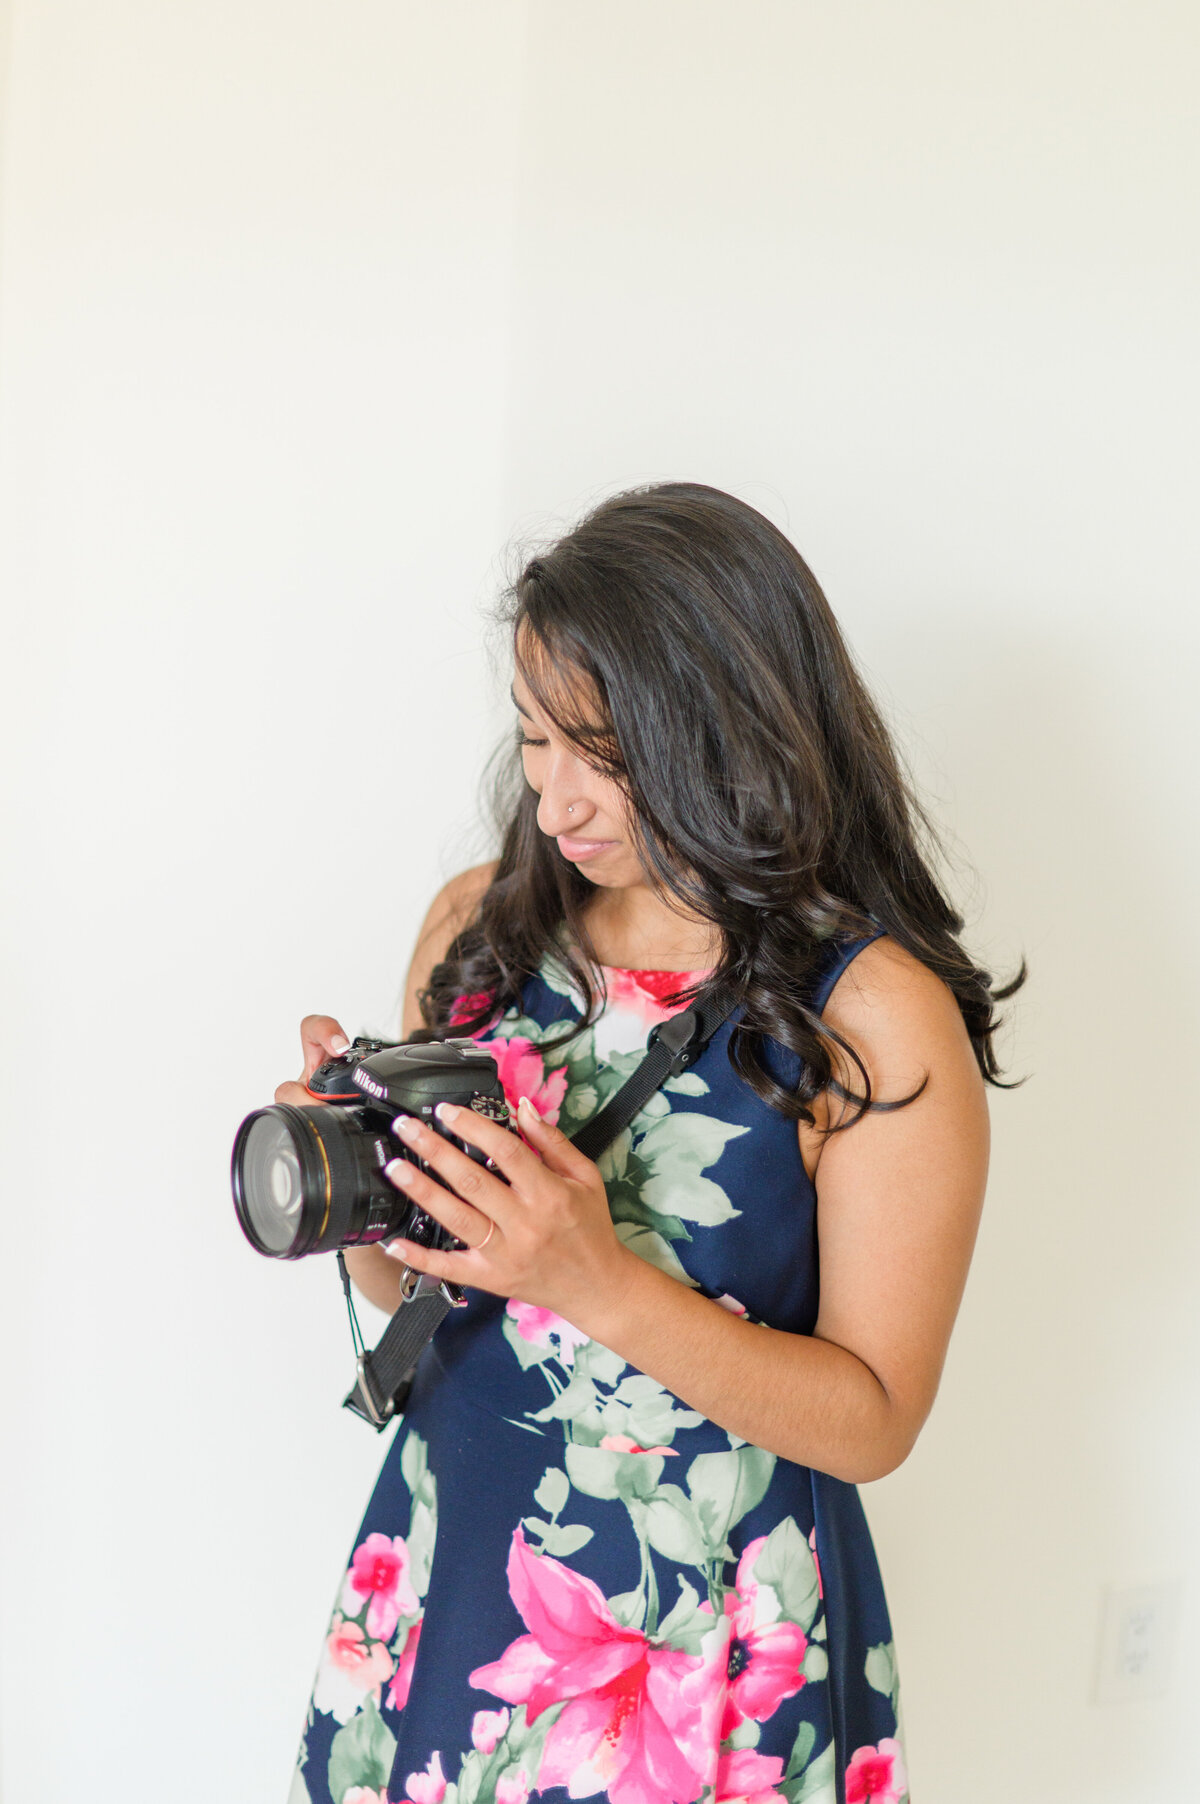 Manali Photography is a Charlottesville based photography educator, brand photographer, and multicultural wedding photographer. In her brand session, we dove deep into all of her behind the scenes processes to tell the story of her unique creative brand.